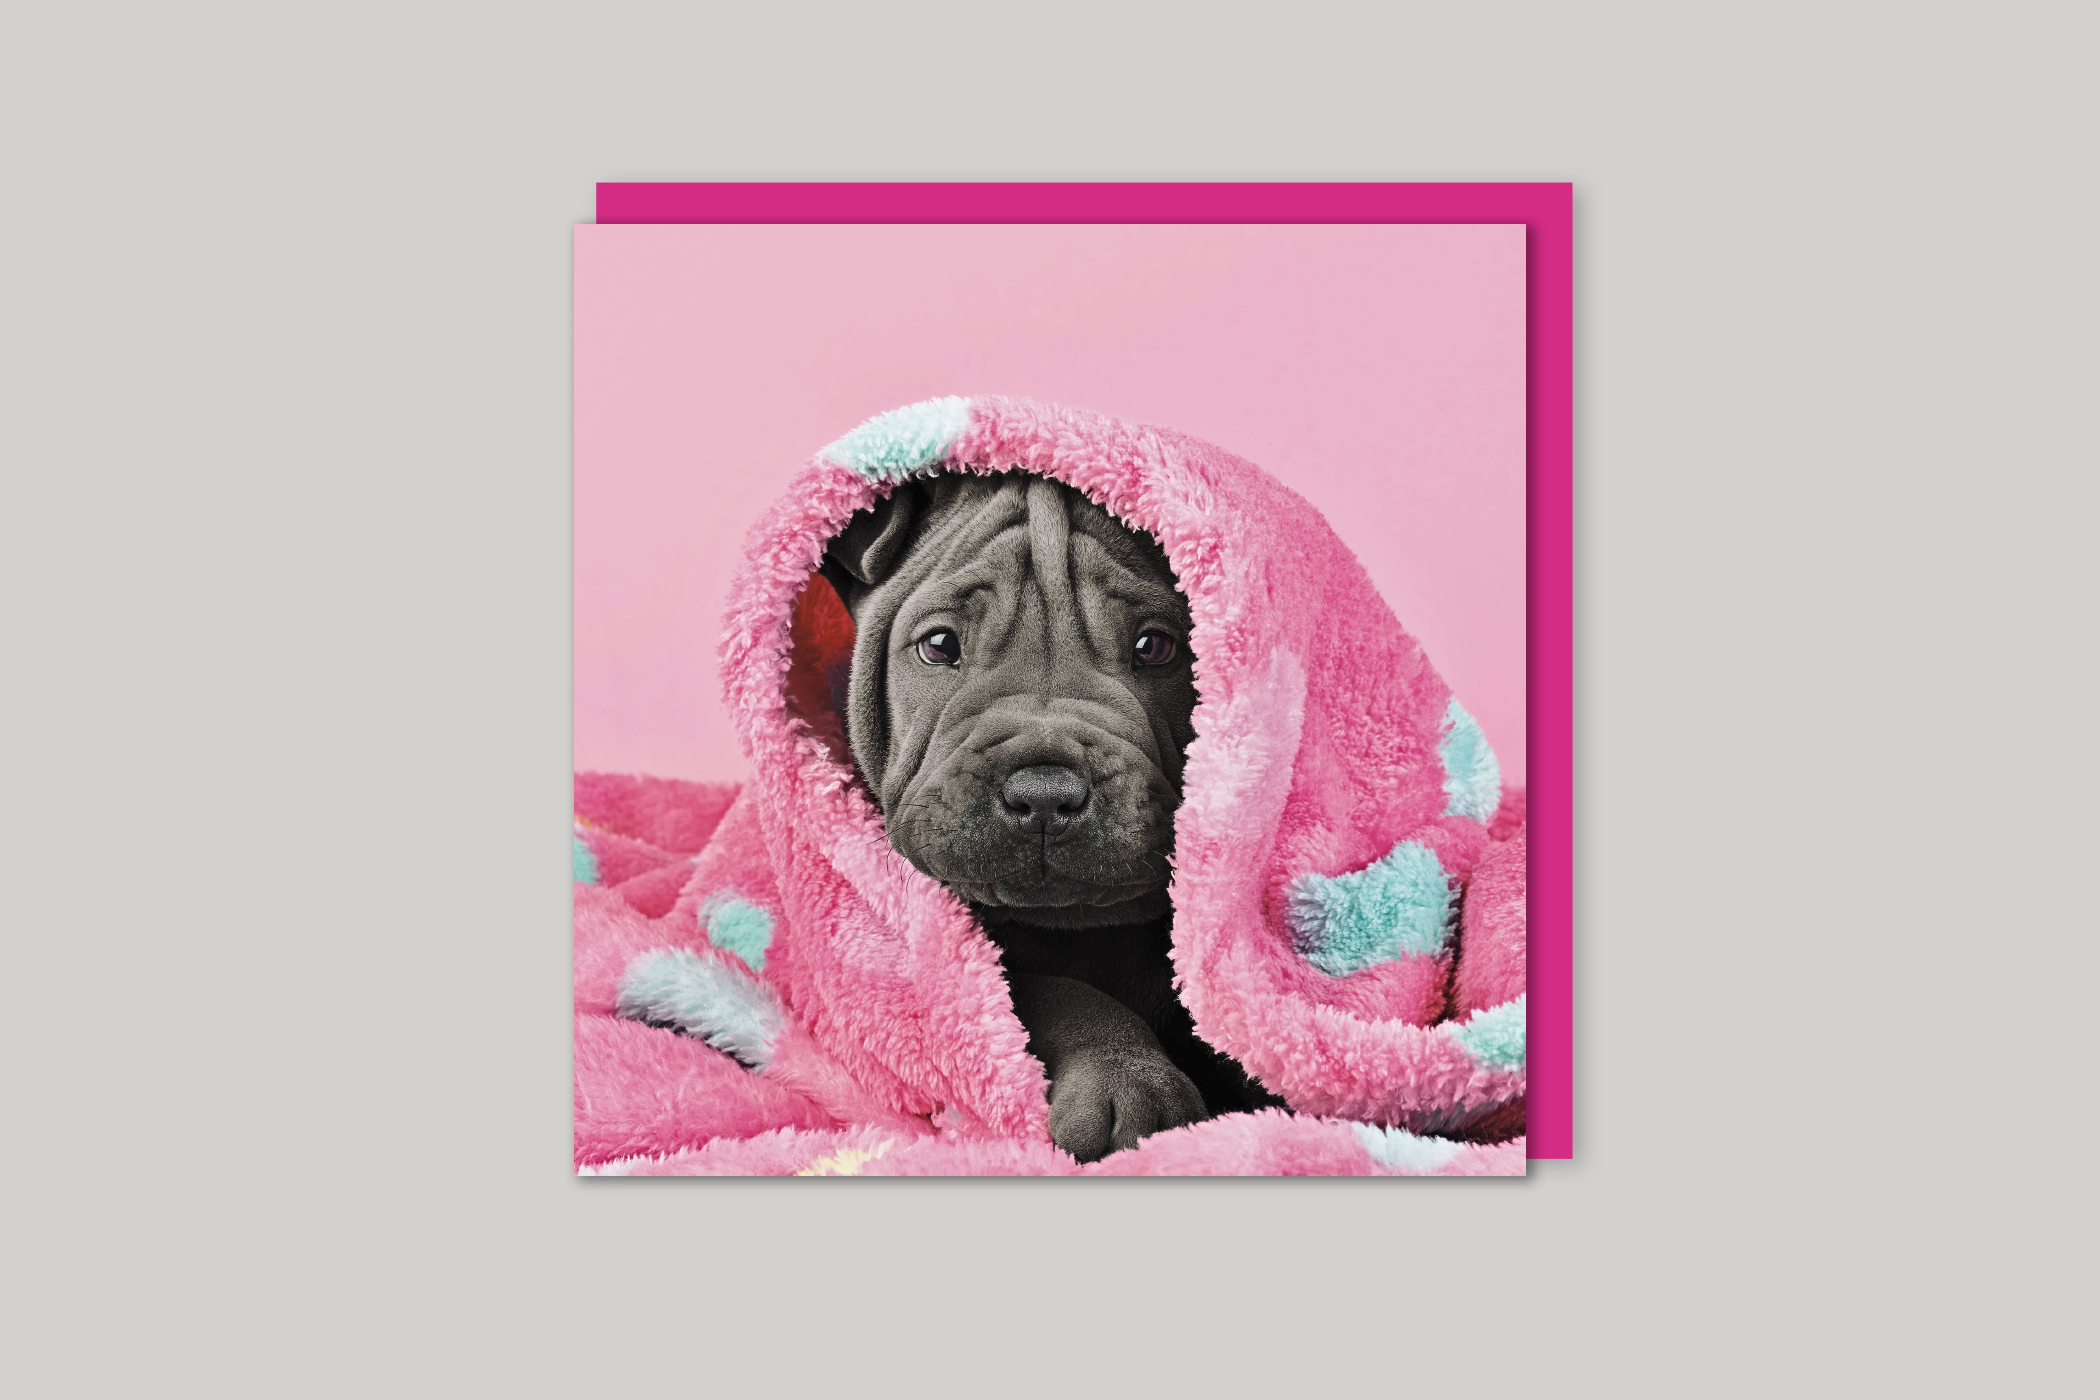 Snuggly Puppy from Exposure range of photographic cards by Icon, back page.